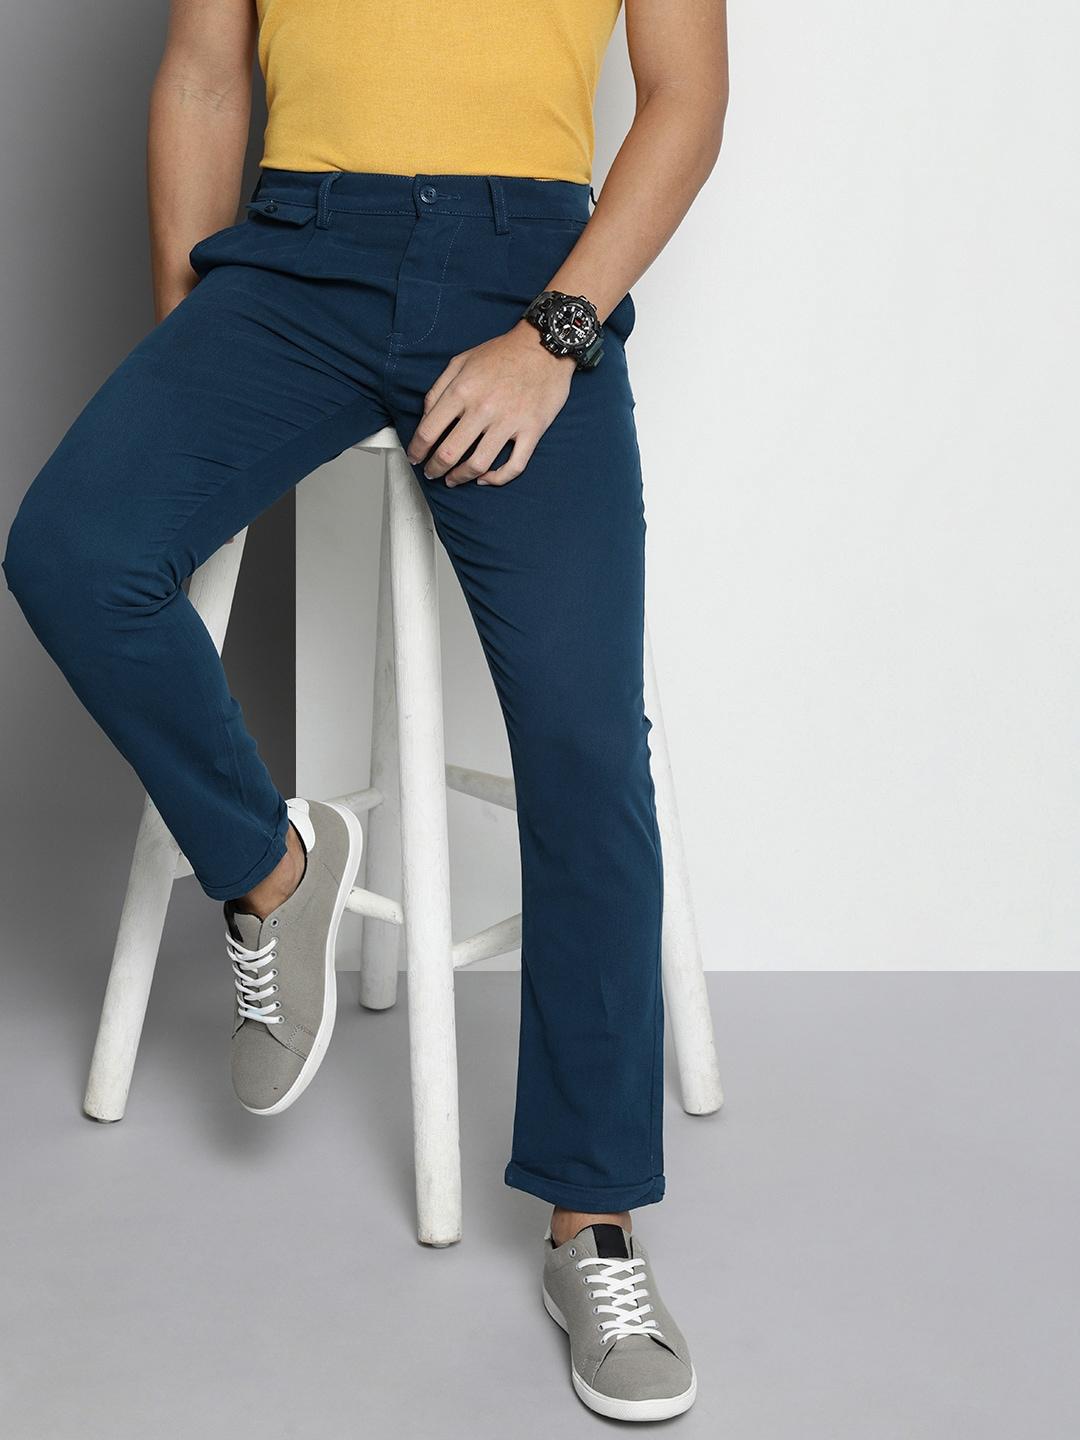 the-indian-garage-co-men-cotton-slim-fit-chinos